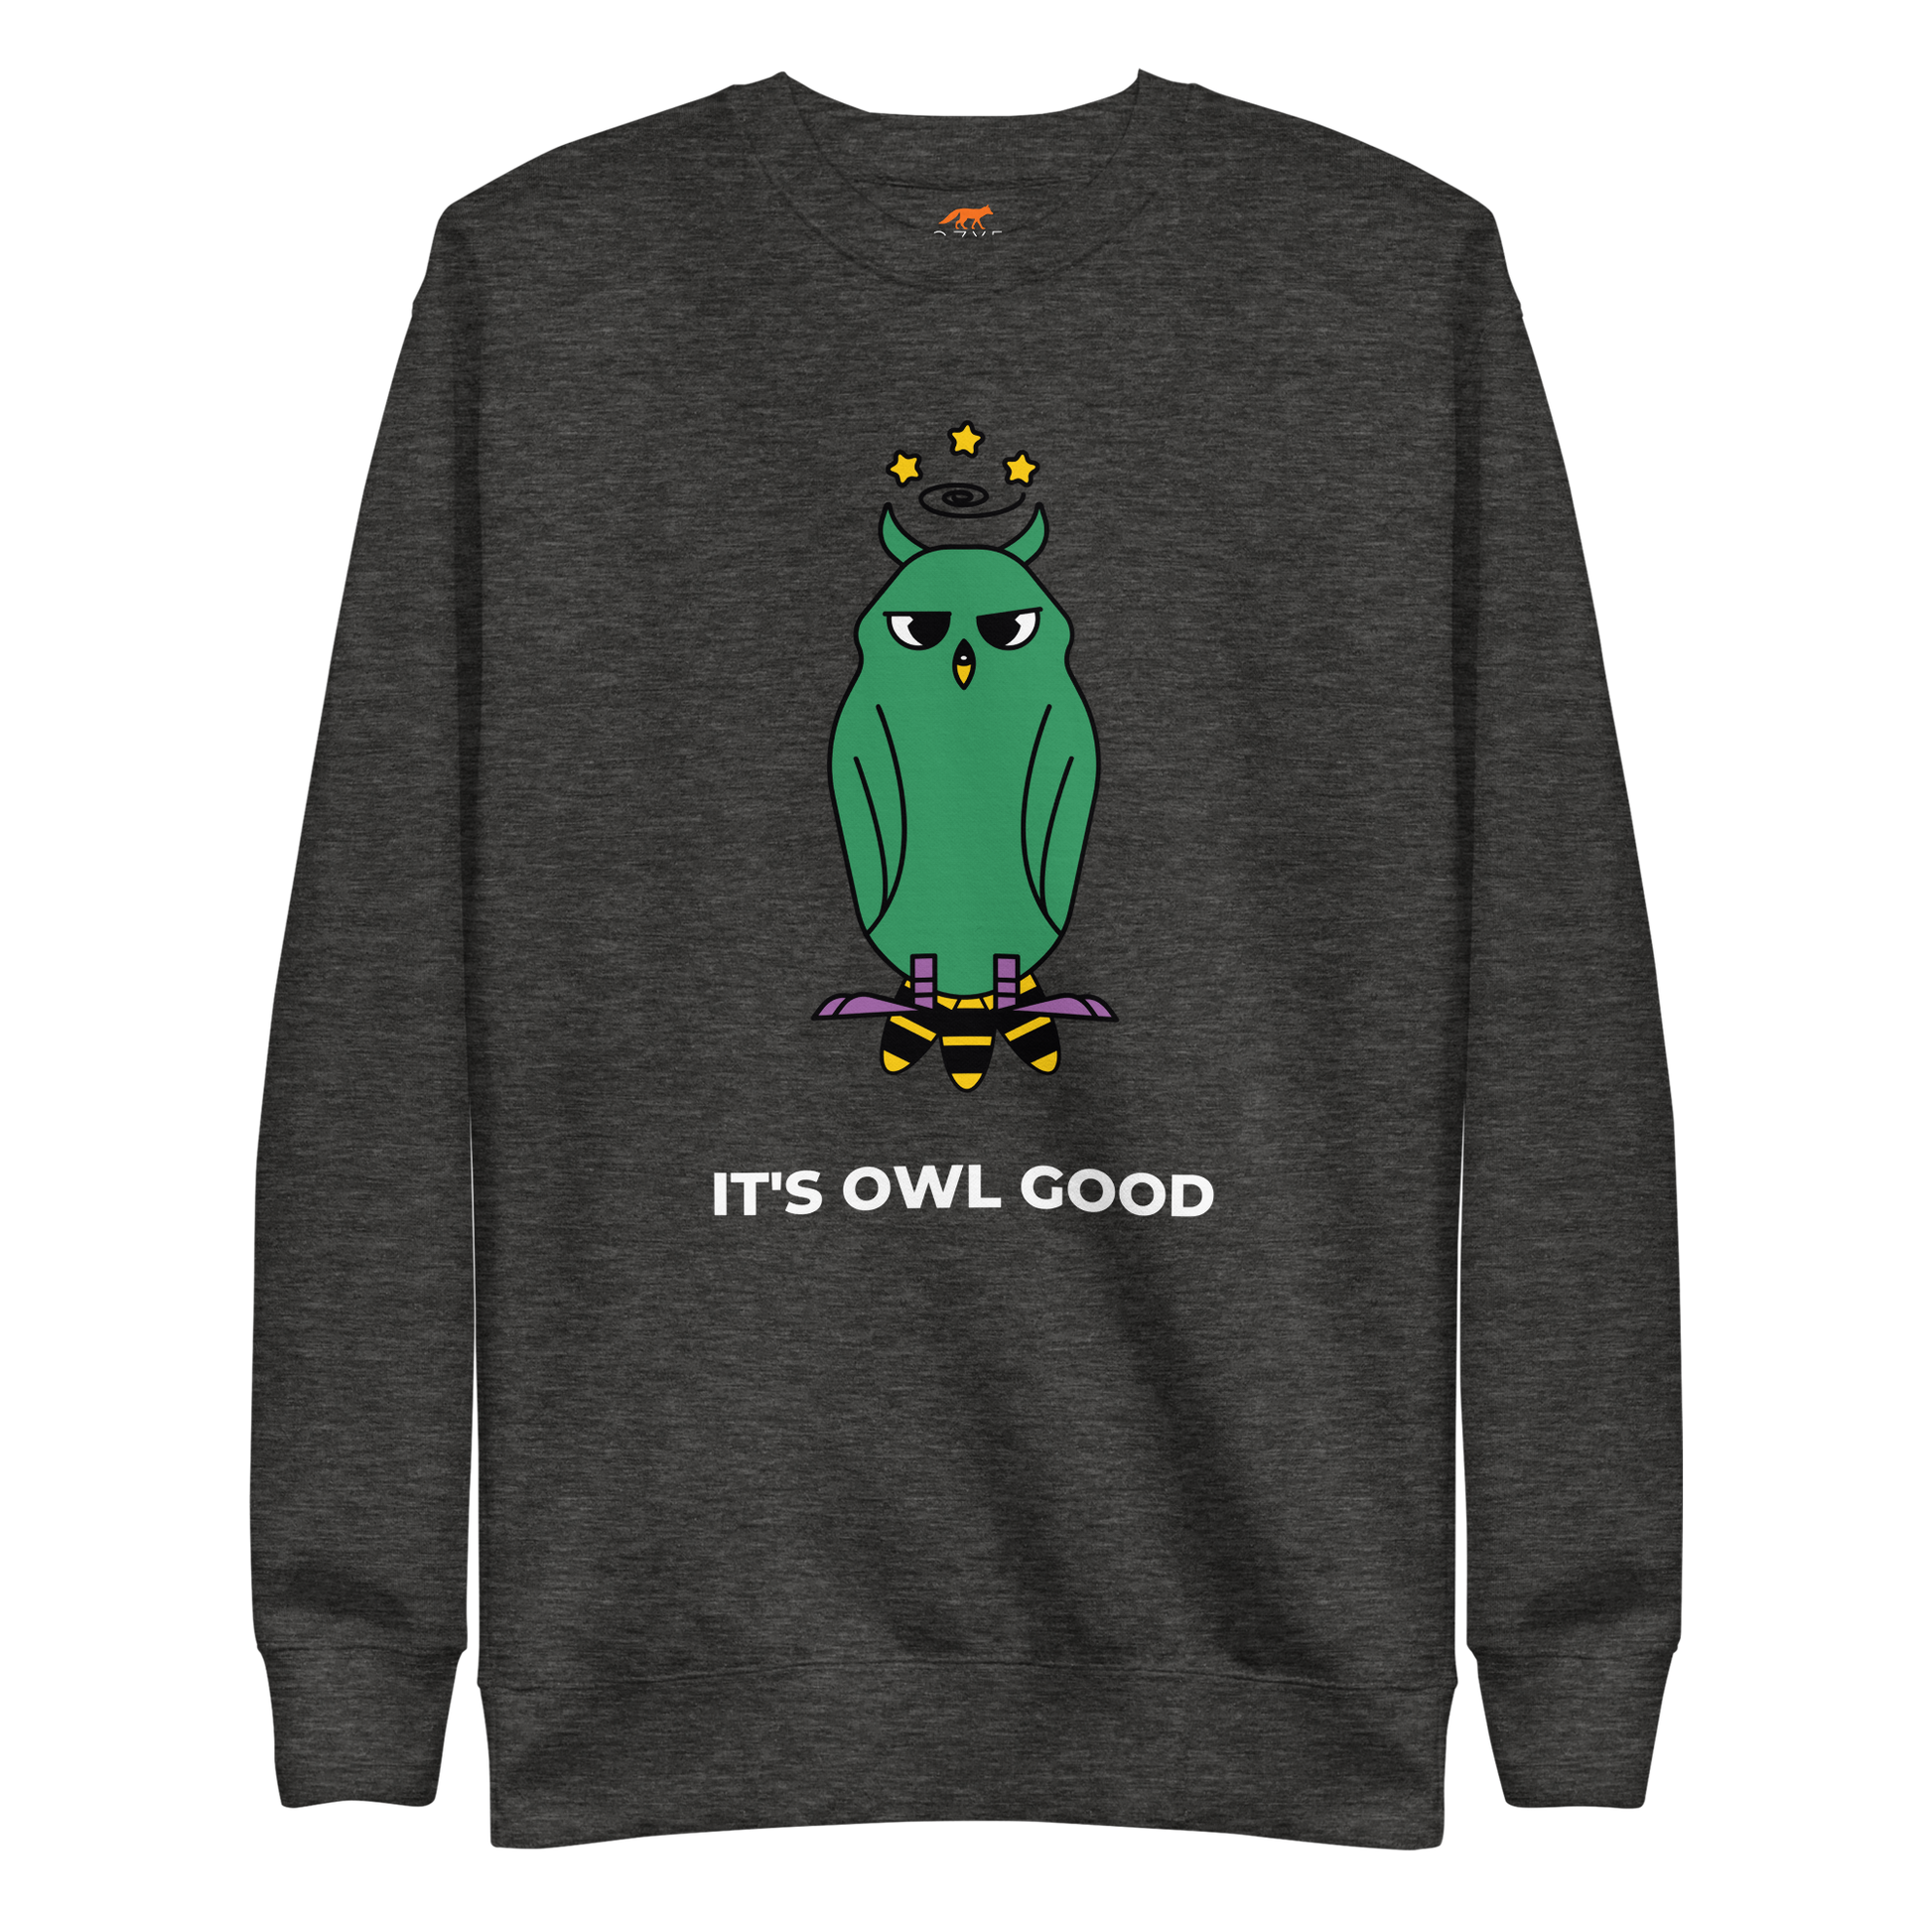 Charcoal Heather Premium Owl Sweatshirt featuring a hootin' cool It's Owl Good graphic on the chest - Funny Graphic Owl Sweatshirts - Boozy Fox